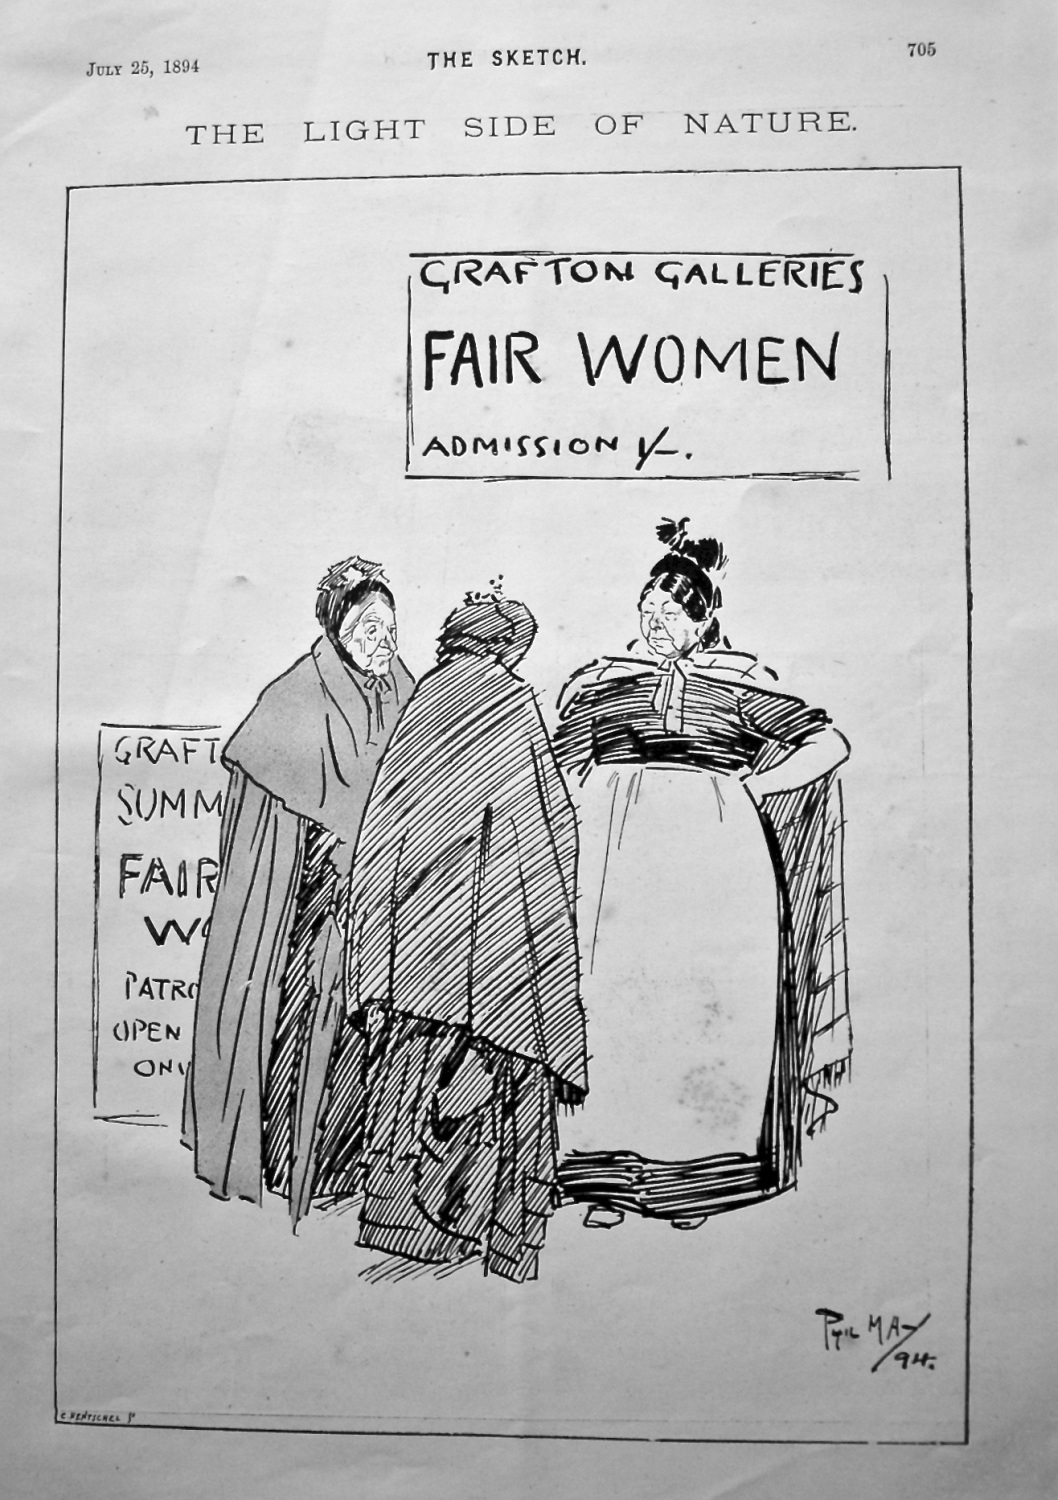 The Light Side of Nature.  Grafton Galleries ,Fair Women, Admission 1 /-.  